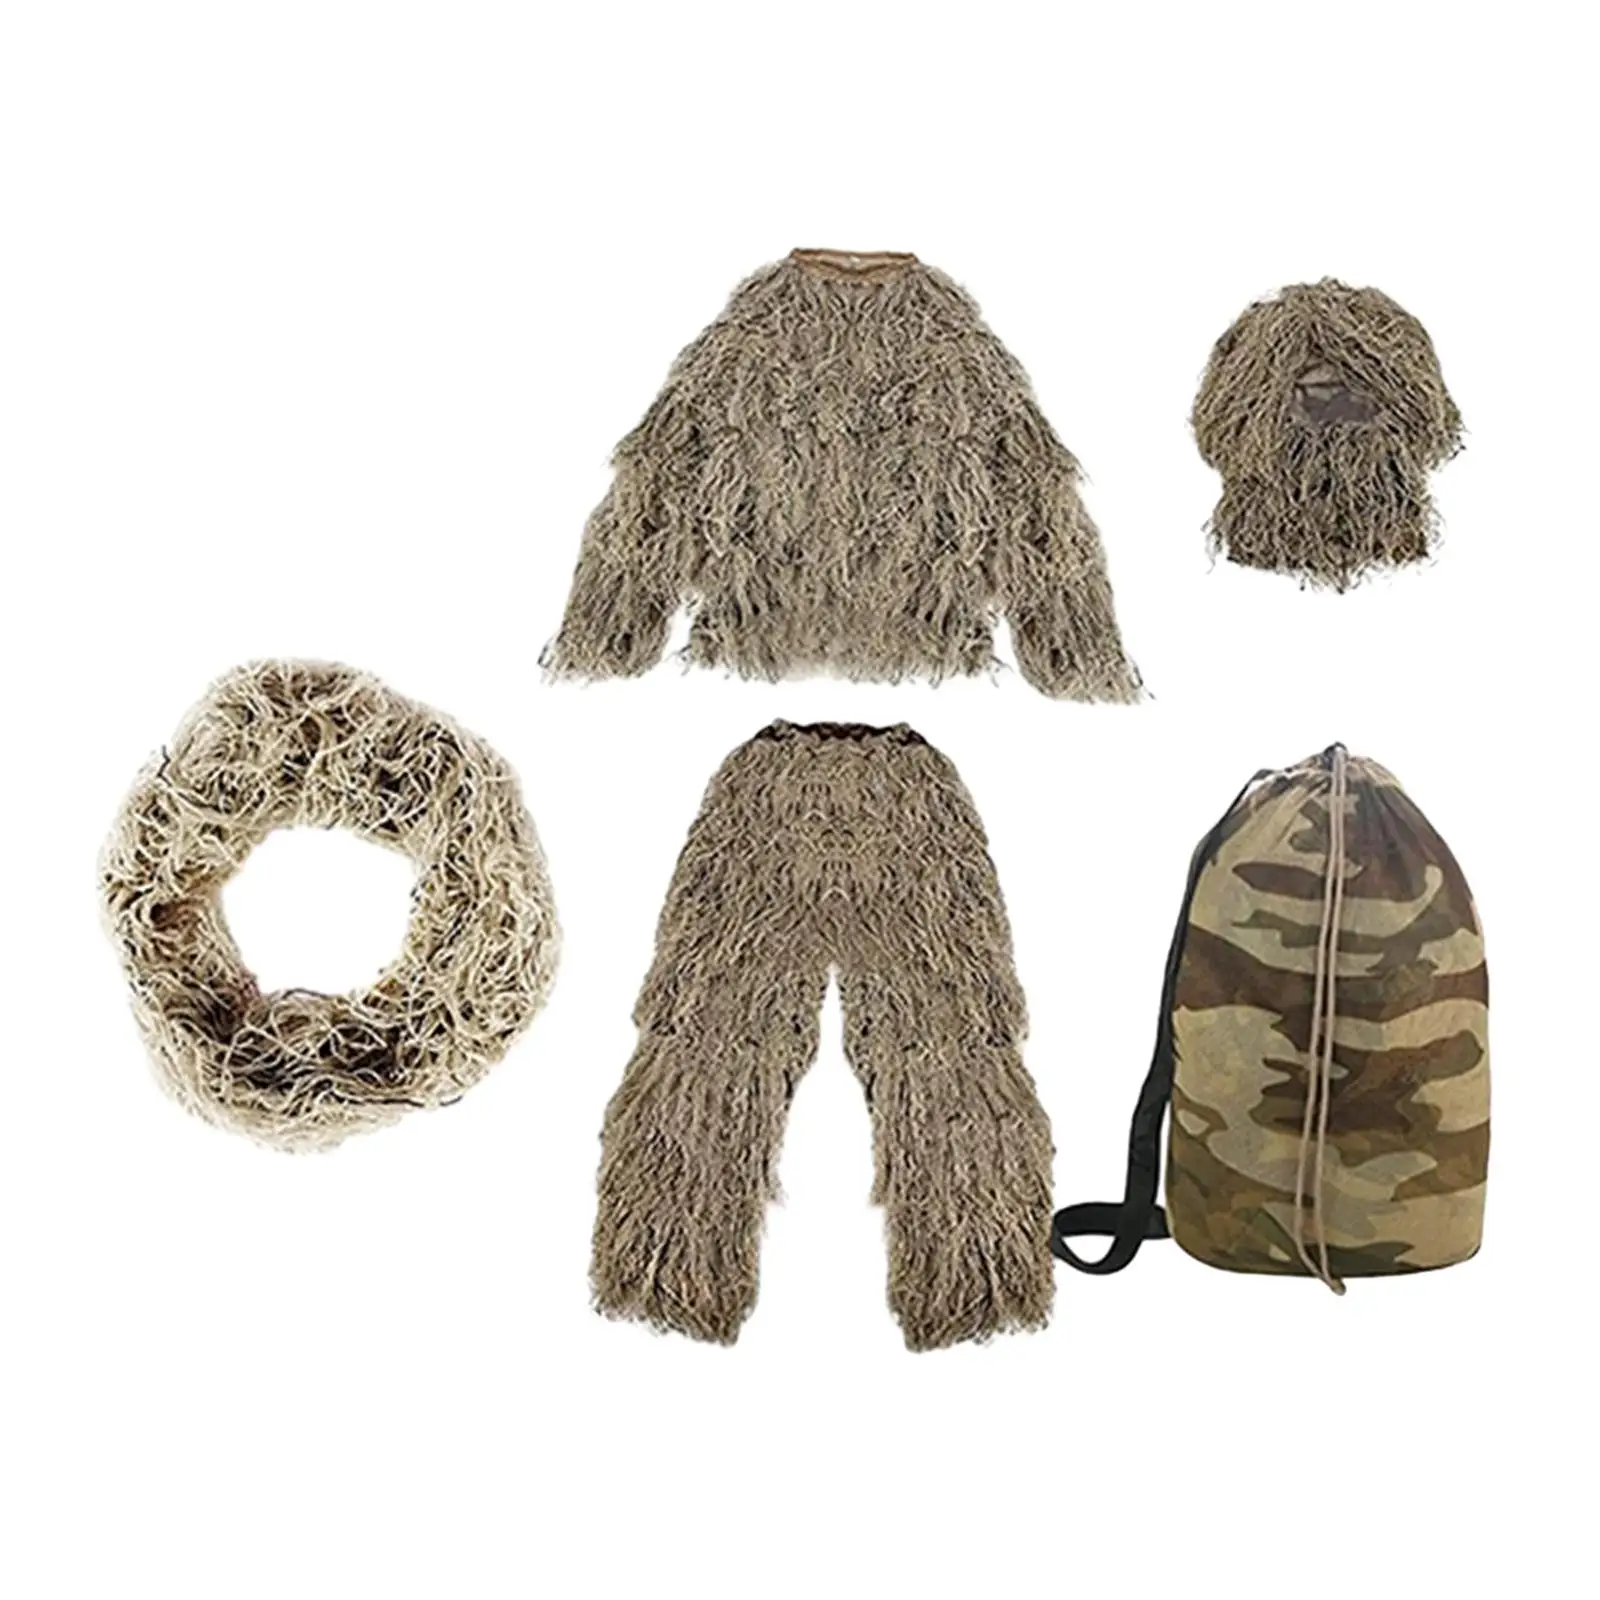 Kids Ghillie Suit Woodland Clothing for Game Birdwatching Photography